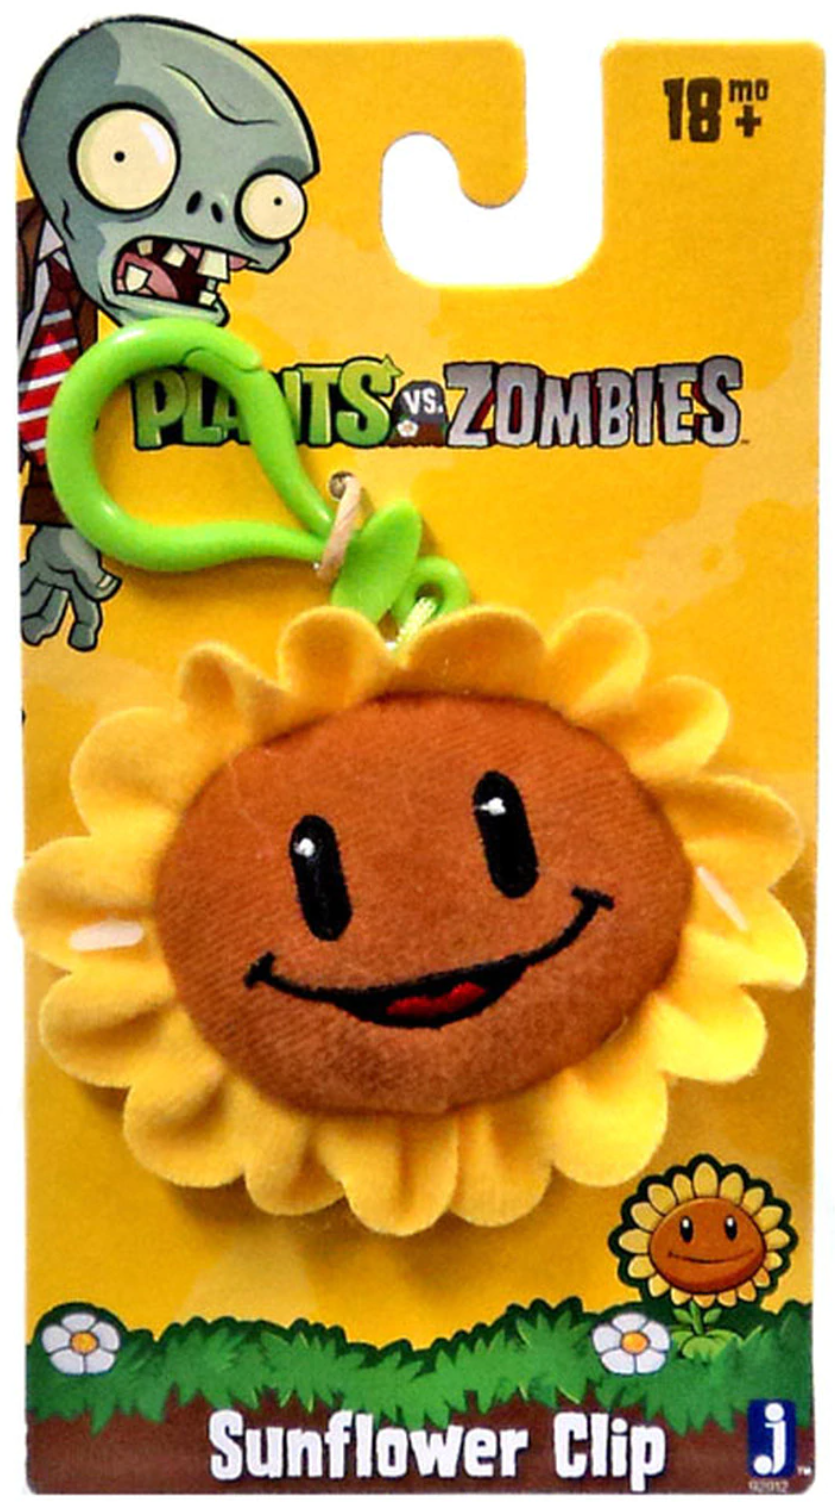 https://static.wikia.nocookie.net/pvzplush/images/f/fa/Jazwares_sunflower_clip.PNG/revision/latest?cb=20210313033842